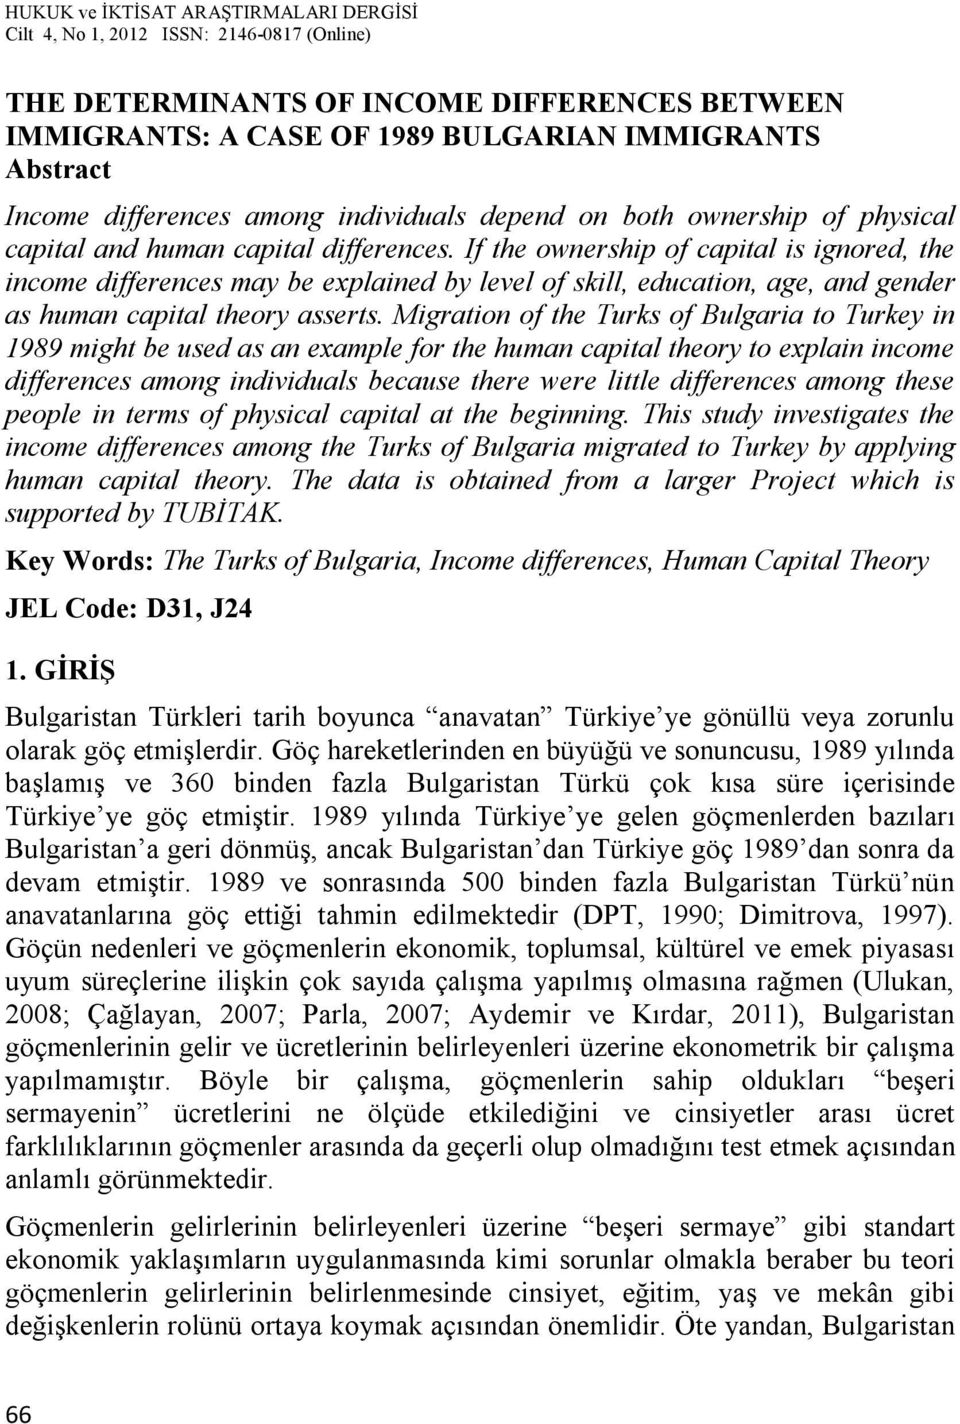 Migration of the Turks of Bulgaria to Turkey in 1989 might be used as an example for the human capital theory to explain income differences among individuals because there were little differences